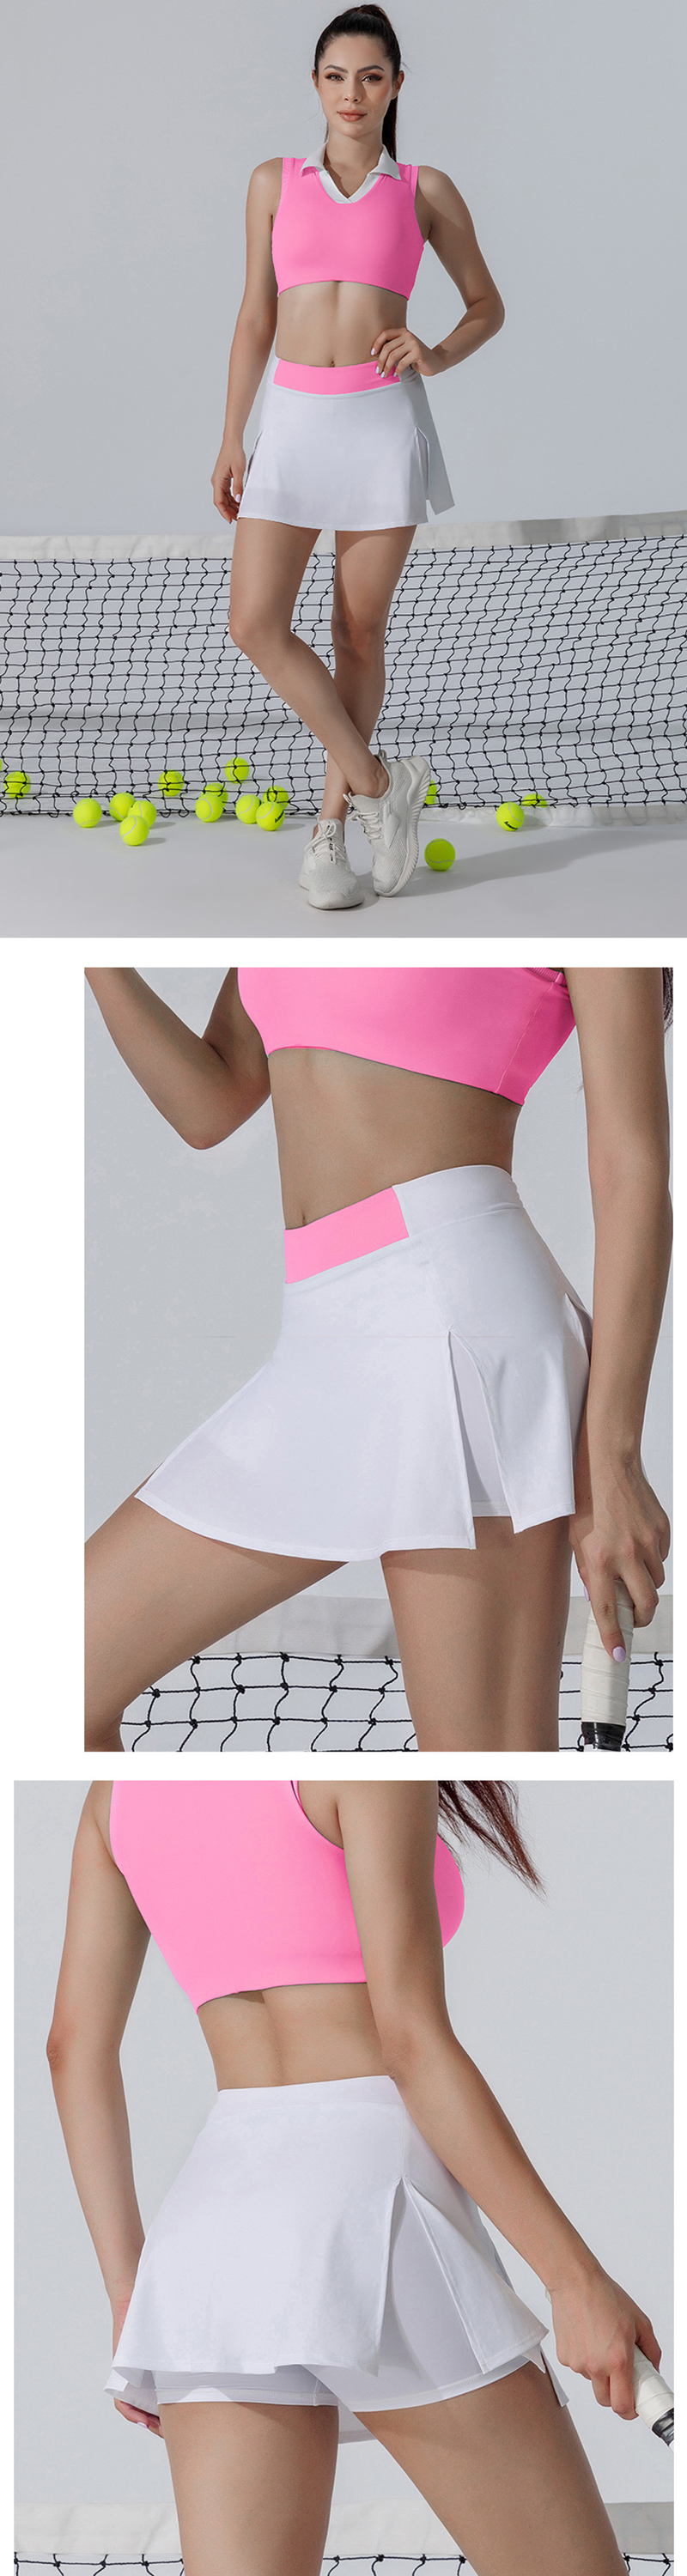 Womens Tennis Skirts With Pockets